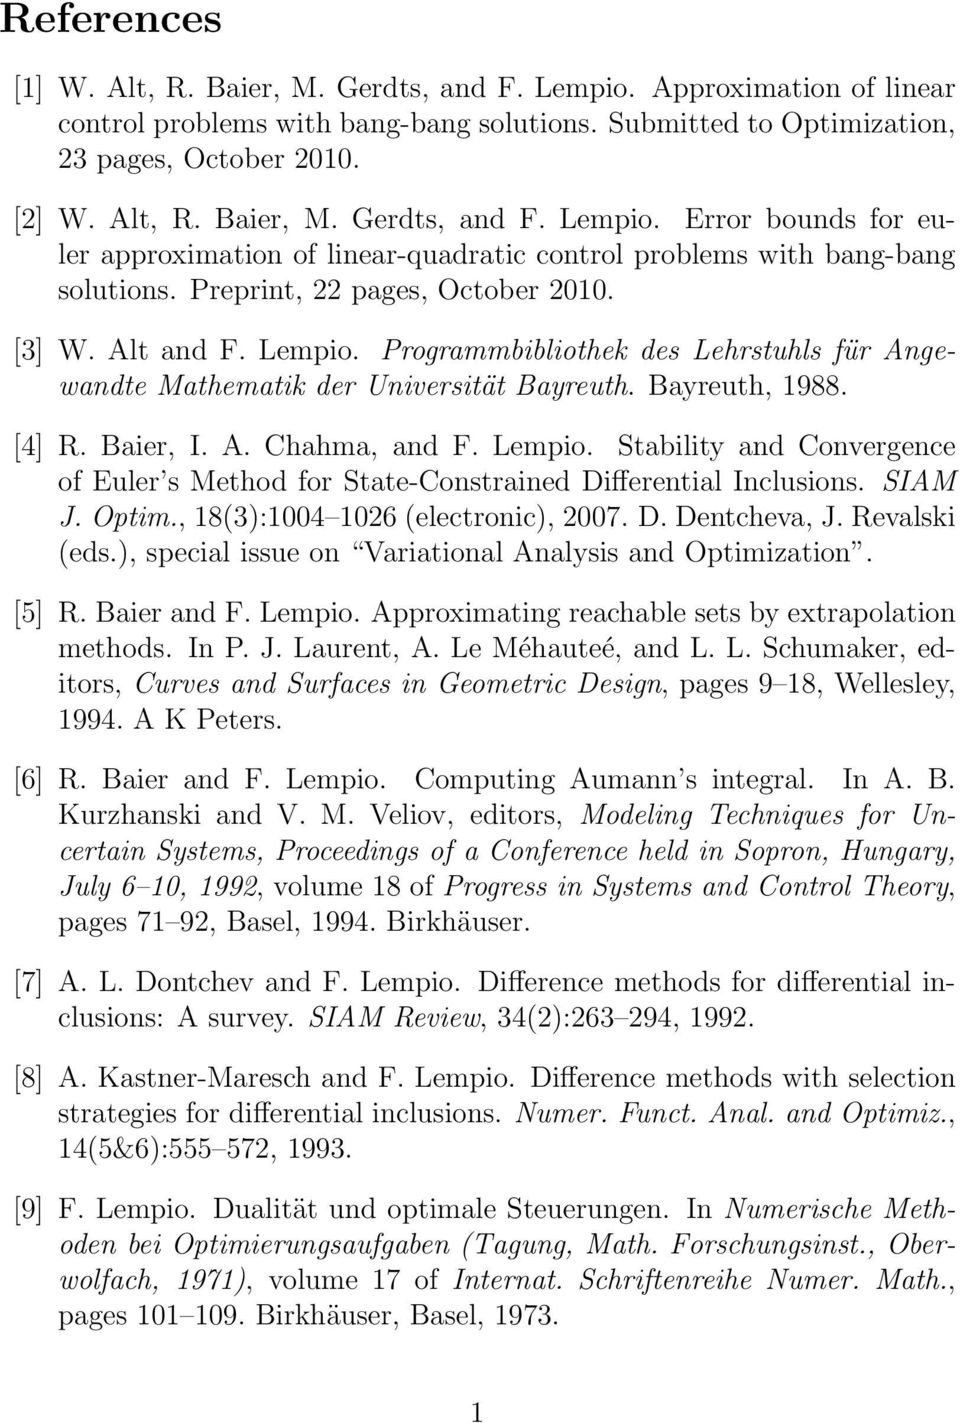 Lempio. Stability and Convergence of Euler s Method for State-Constrained Differential Inclusions. SIAM J. Optim., 18(3):1004 1026 (electronic), 2007. D. Dentcheva, J. Revalski (eds.